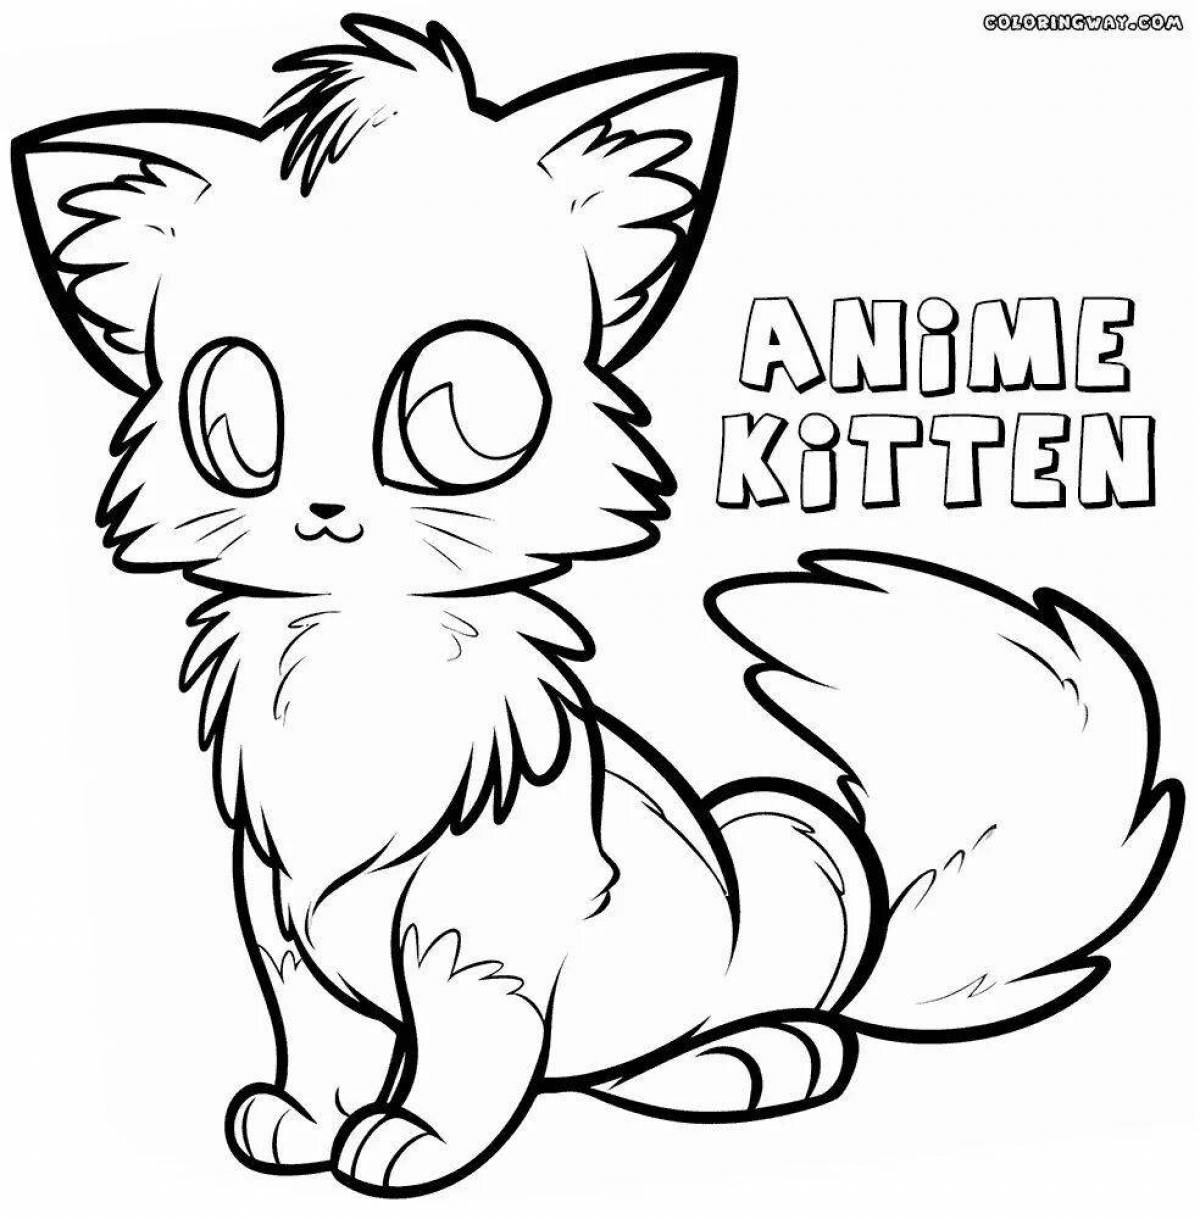 Gorgeous anime cat coloring page